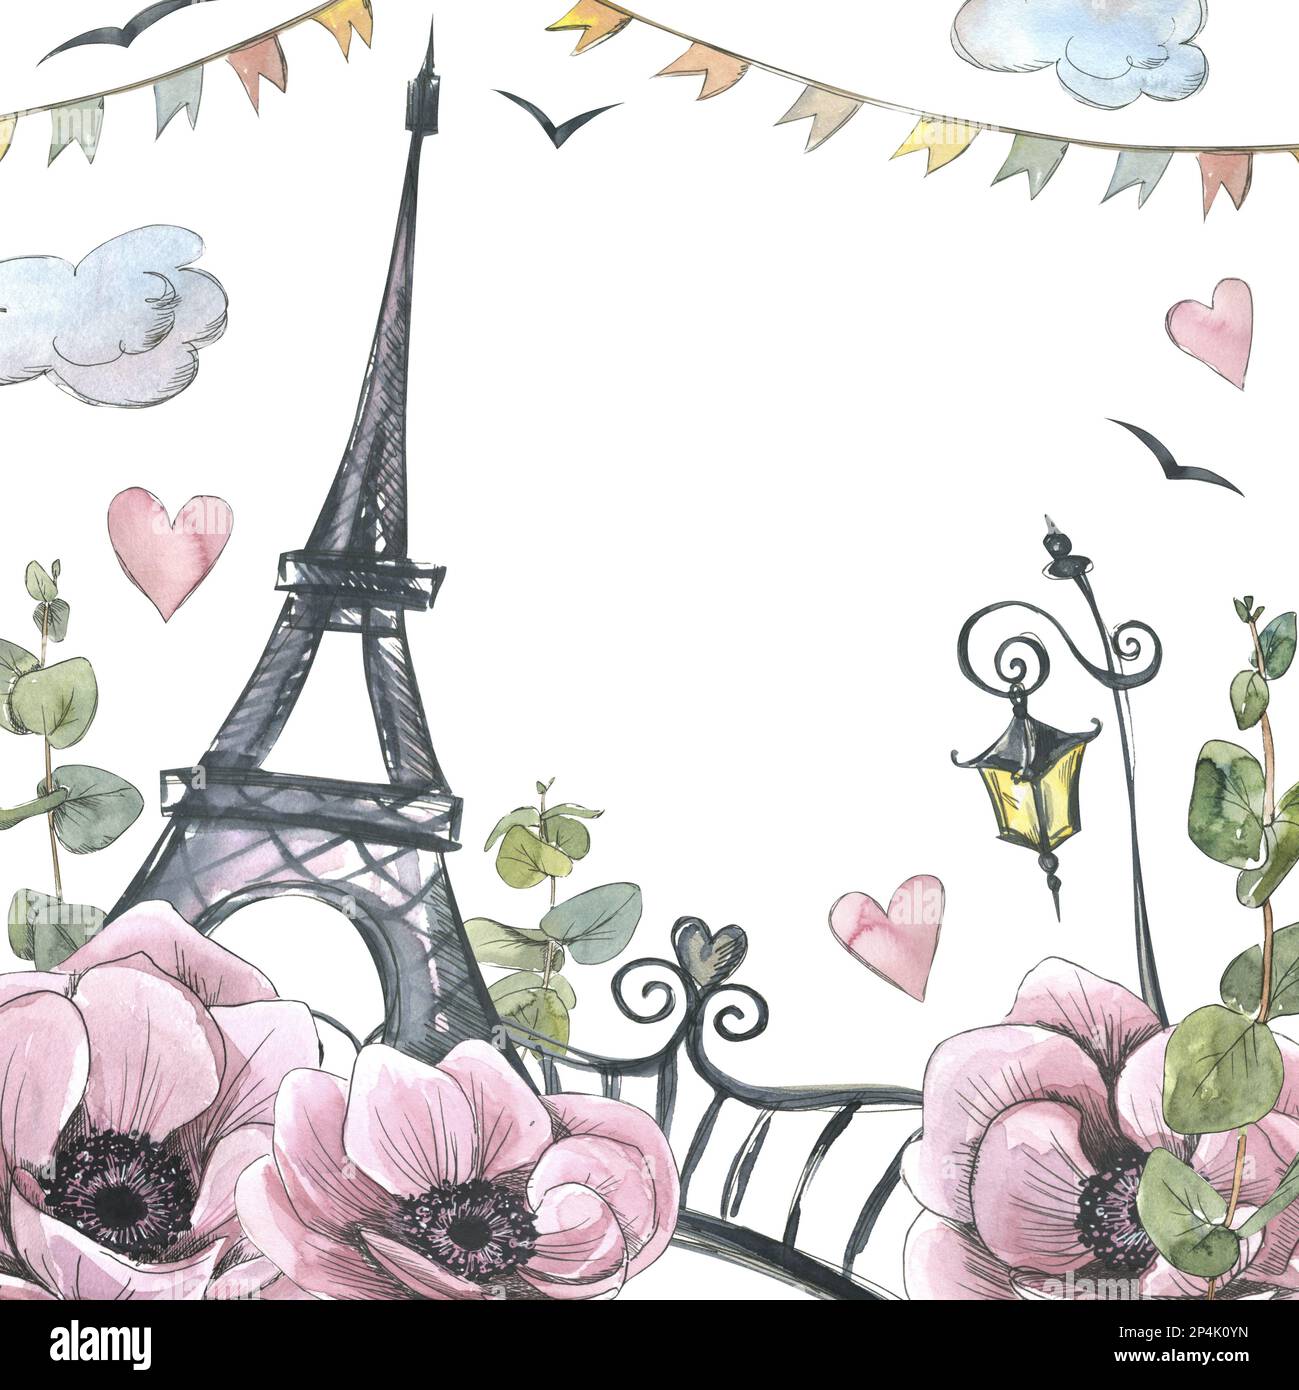 A frame with the Eiffel Tower, lanterns, a garland of flags and a bridge, anemone flowers and eucalyptus twigs. Watercolor illustration in sketch Stock Photo